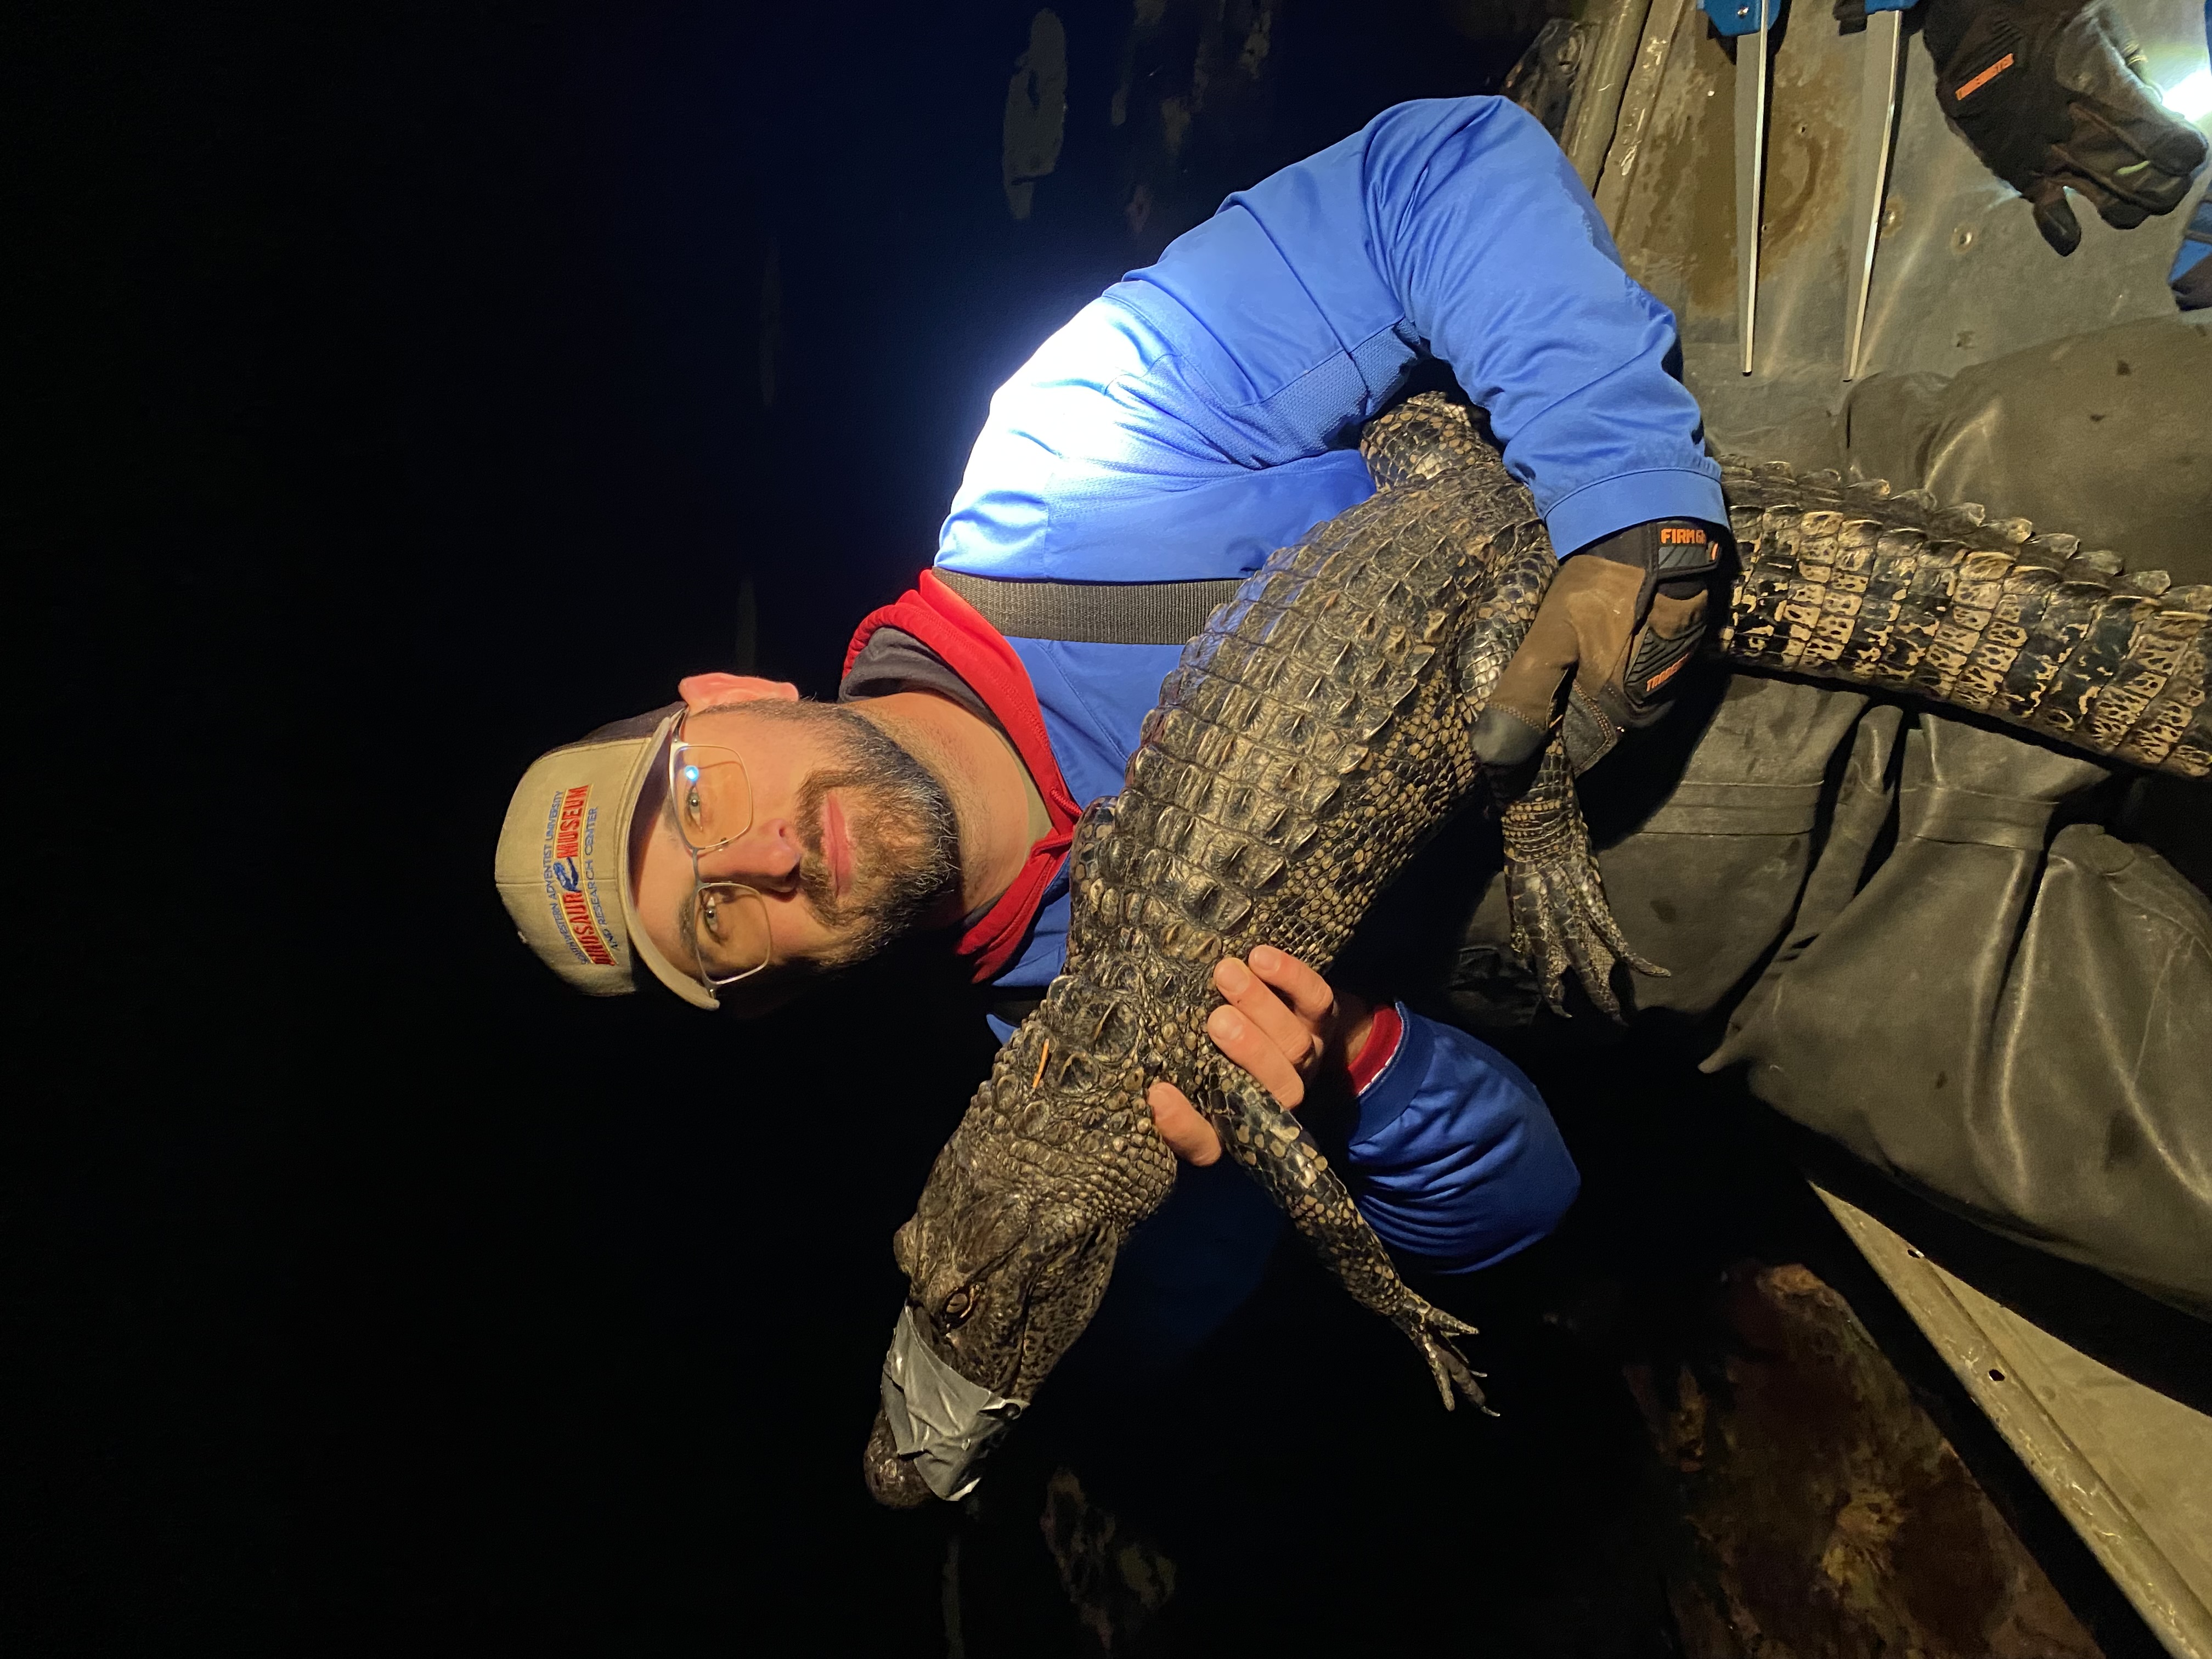 Jared Woods with gator at night